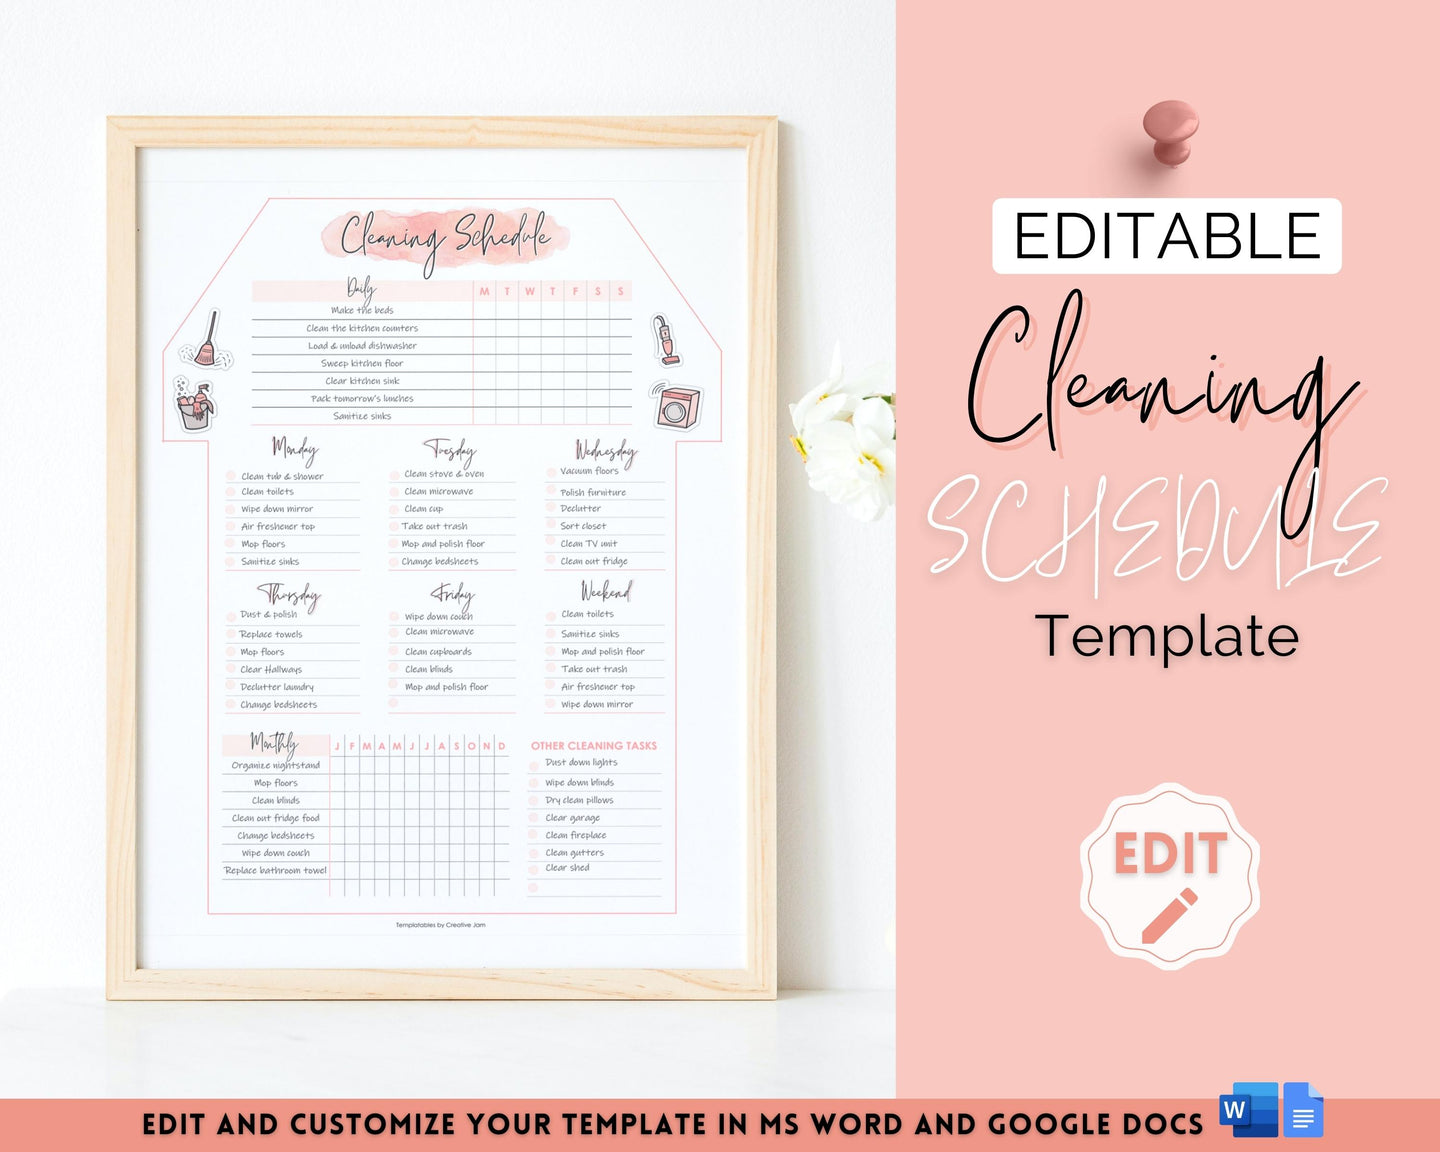 Editable House Shape Cleaning Schedule & Housekeeping Checklist for House Chores | Pink Watercolor